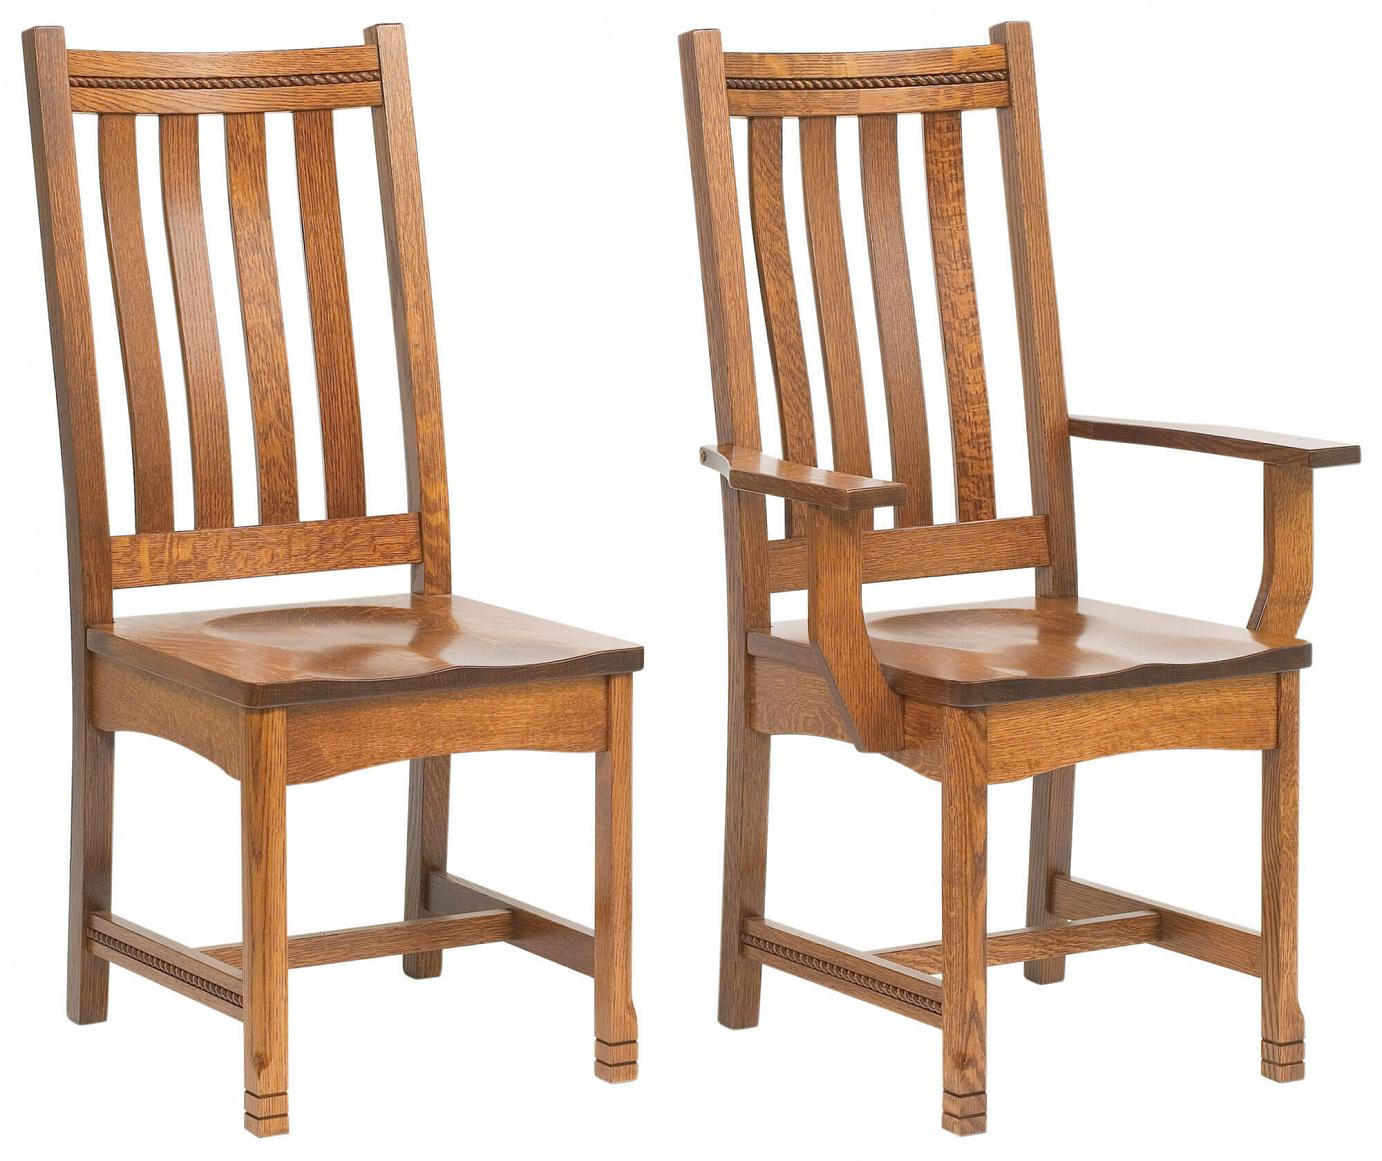 RH Yoder West Lake Chairs